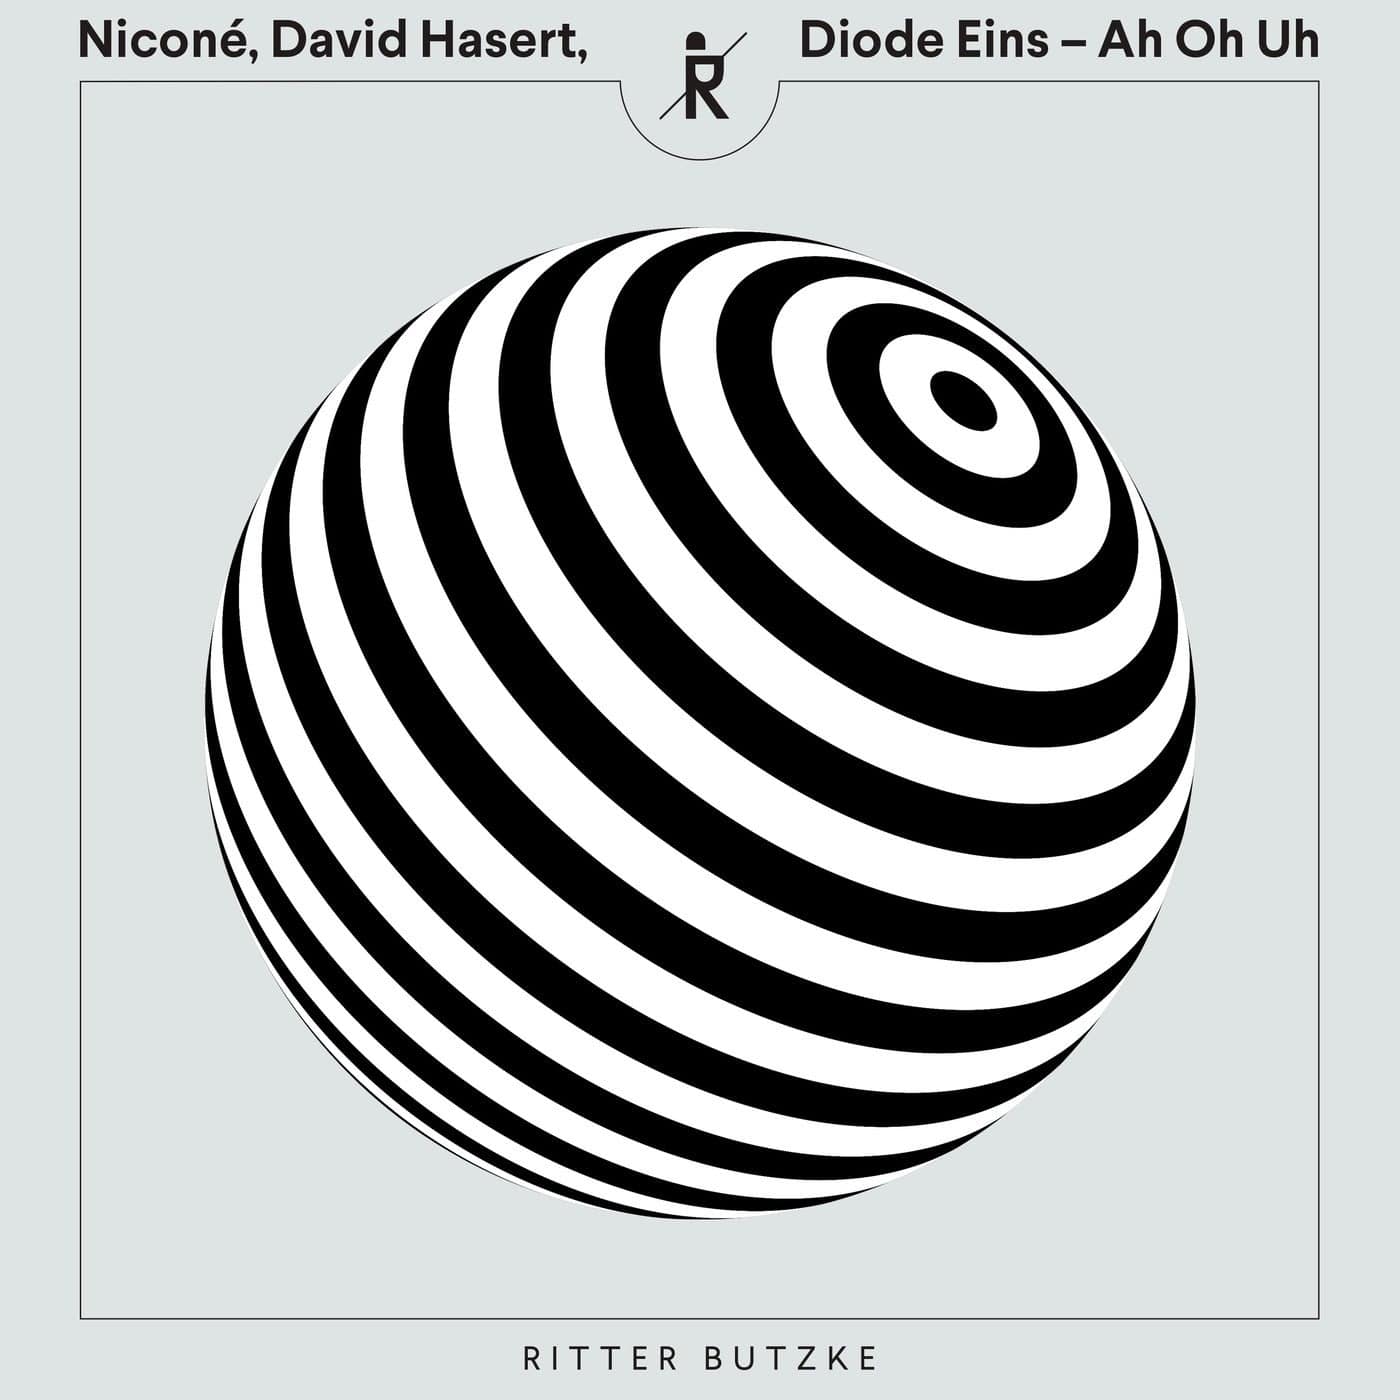 image cover: Nicone, David Hasert, Diode Eins - Ah Oh Uh / RBR229